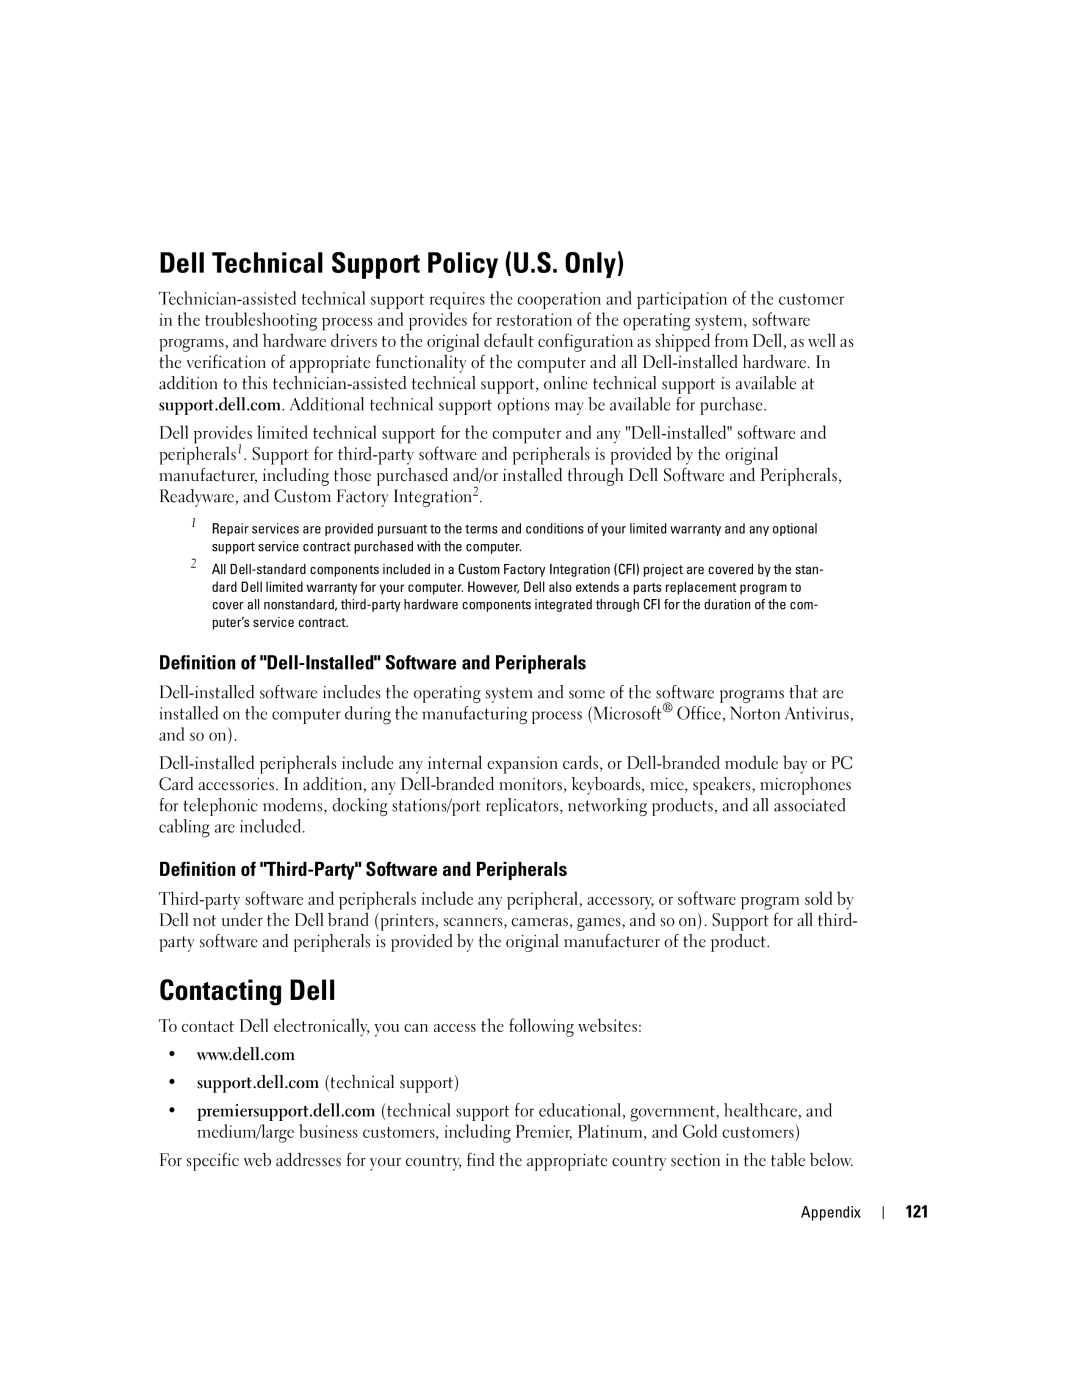 Dell XPS GEN 3 manual Dell Technical Support Policy U.S. Only, Contacting Dell, 121 